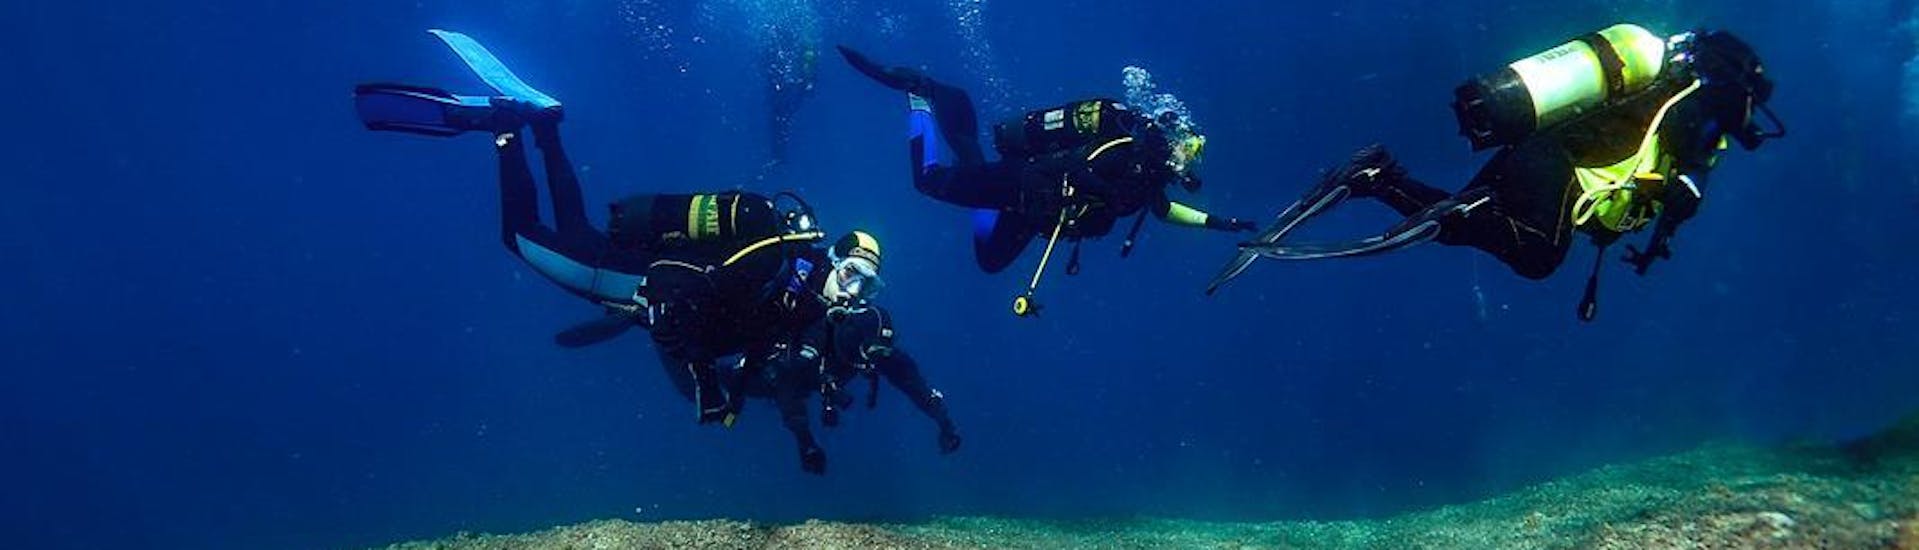 scuba-diving-course-for-beginners---ssi-open-water-diver-hero